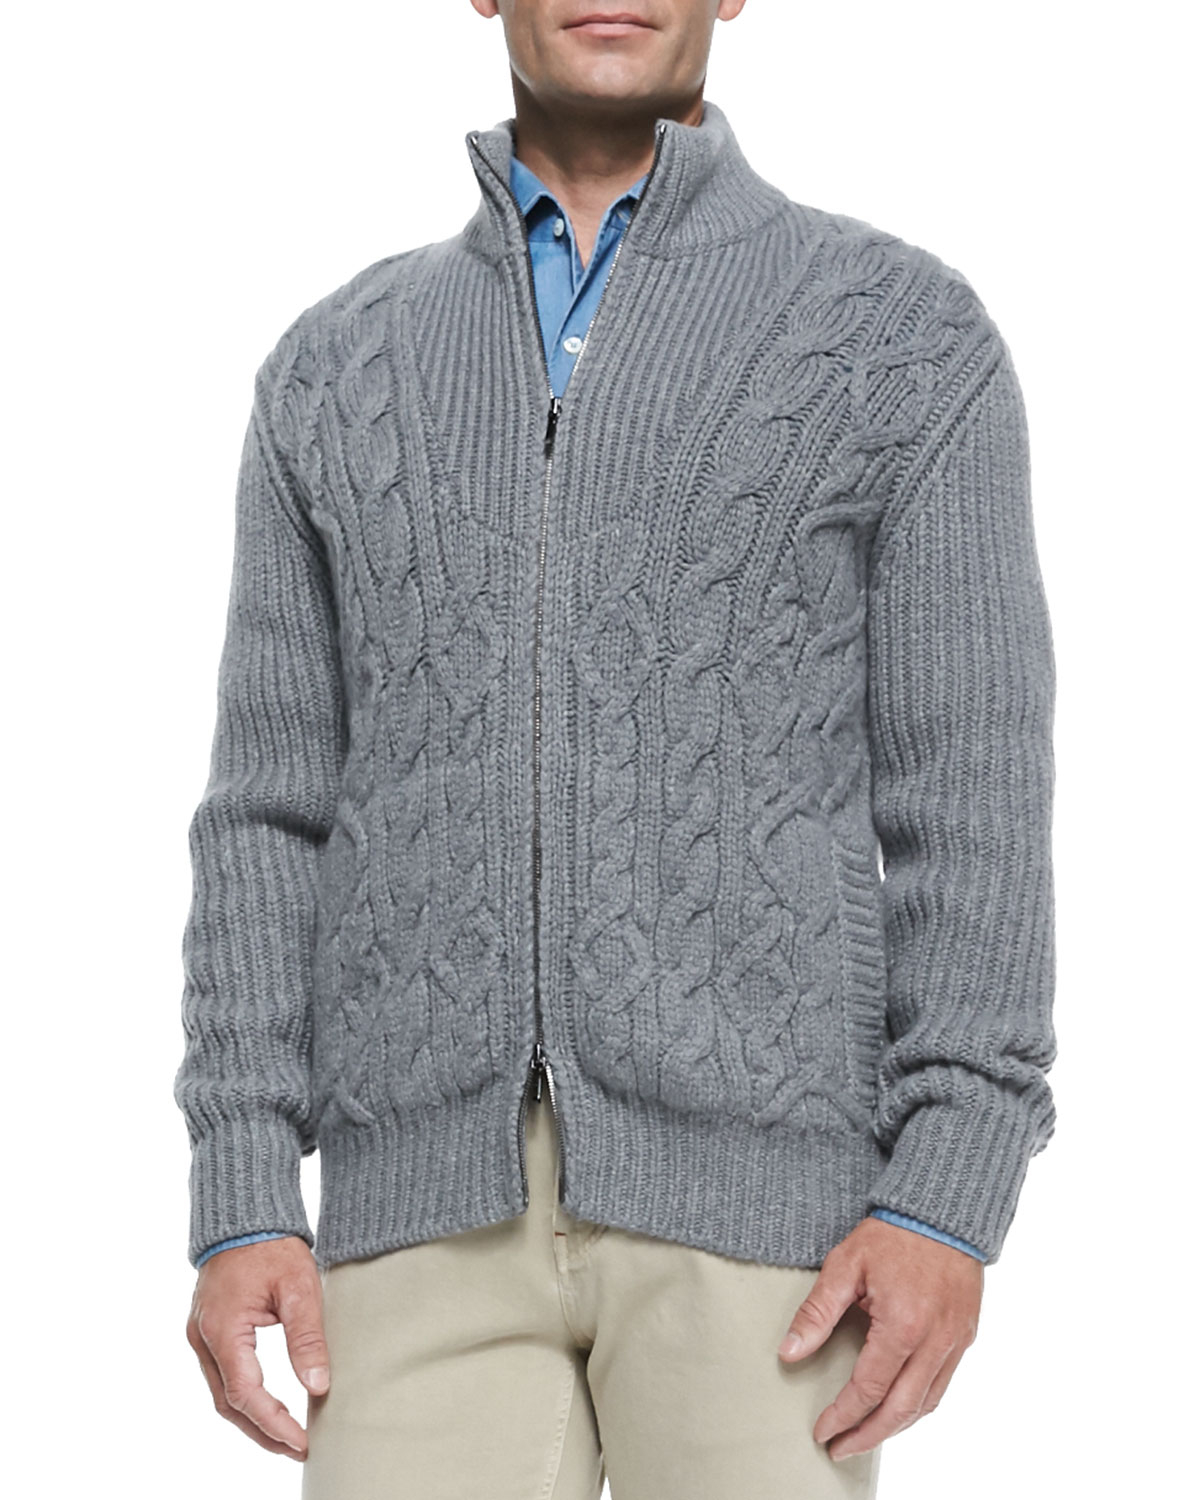 Lyst - Loro Piana Baby Cashmere Cable-Knit Zip Cardigan in Gray for Men